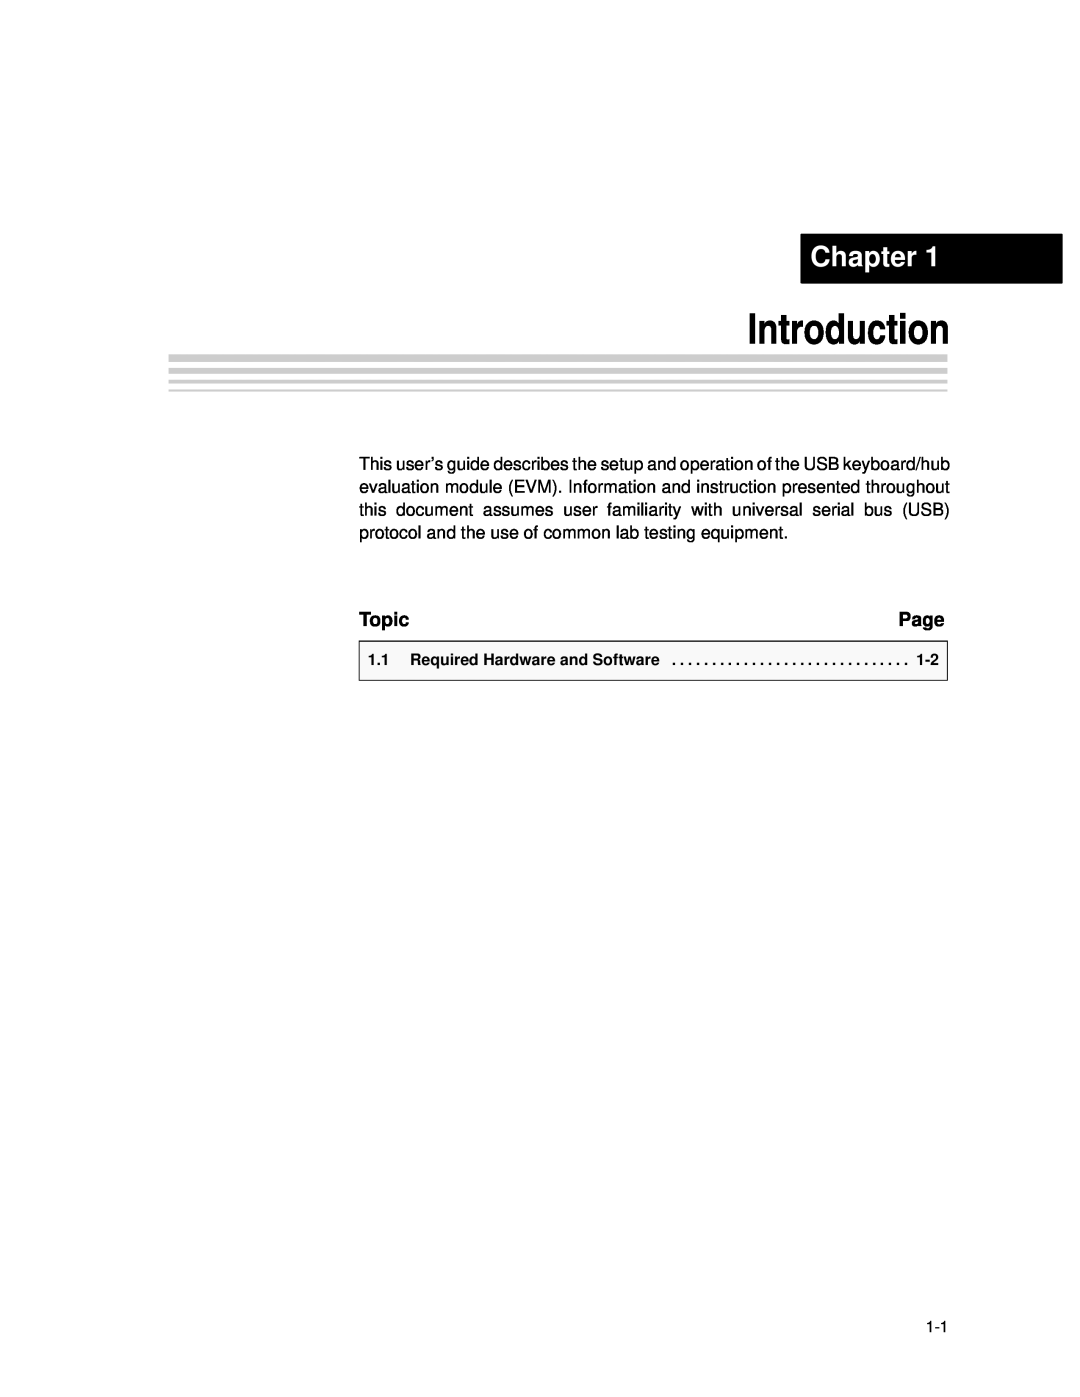 Texas Instruments TPS2149 manual Introduction, Chapter, Topic, Page 